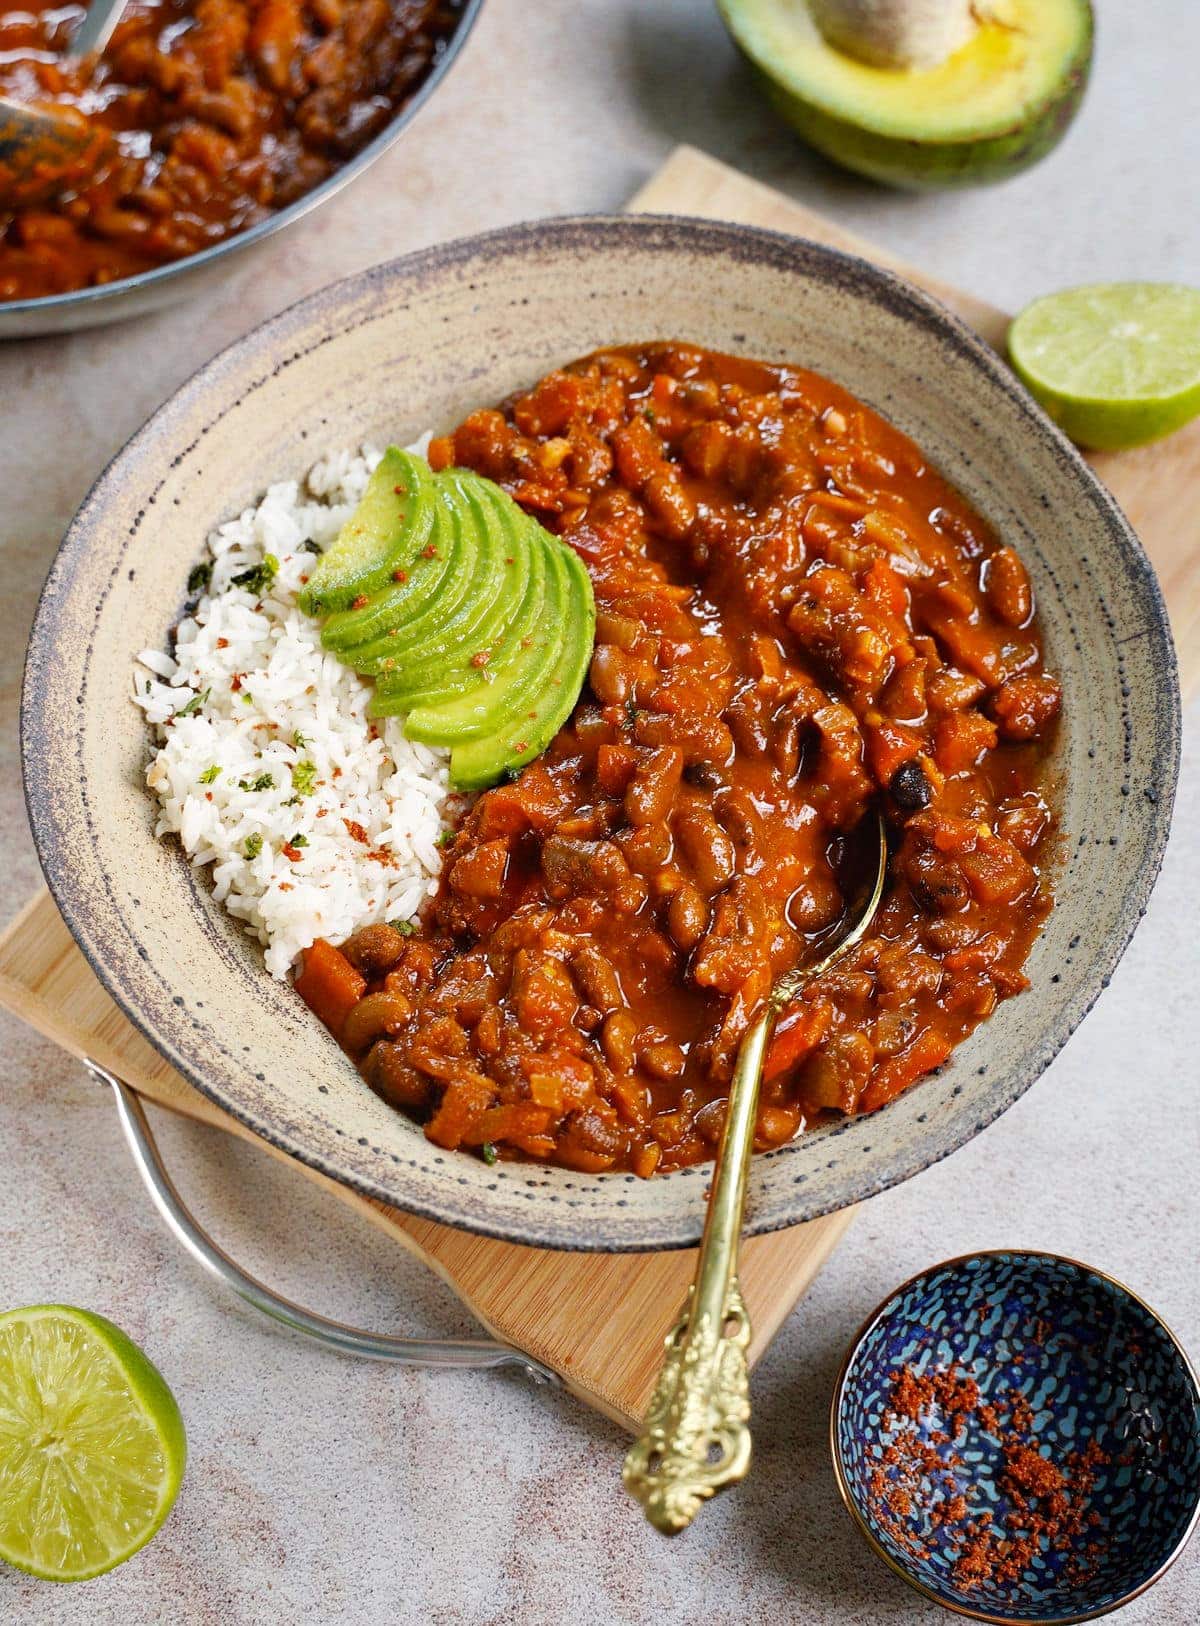 Vegetarian Chili in bowl with avocado and rice